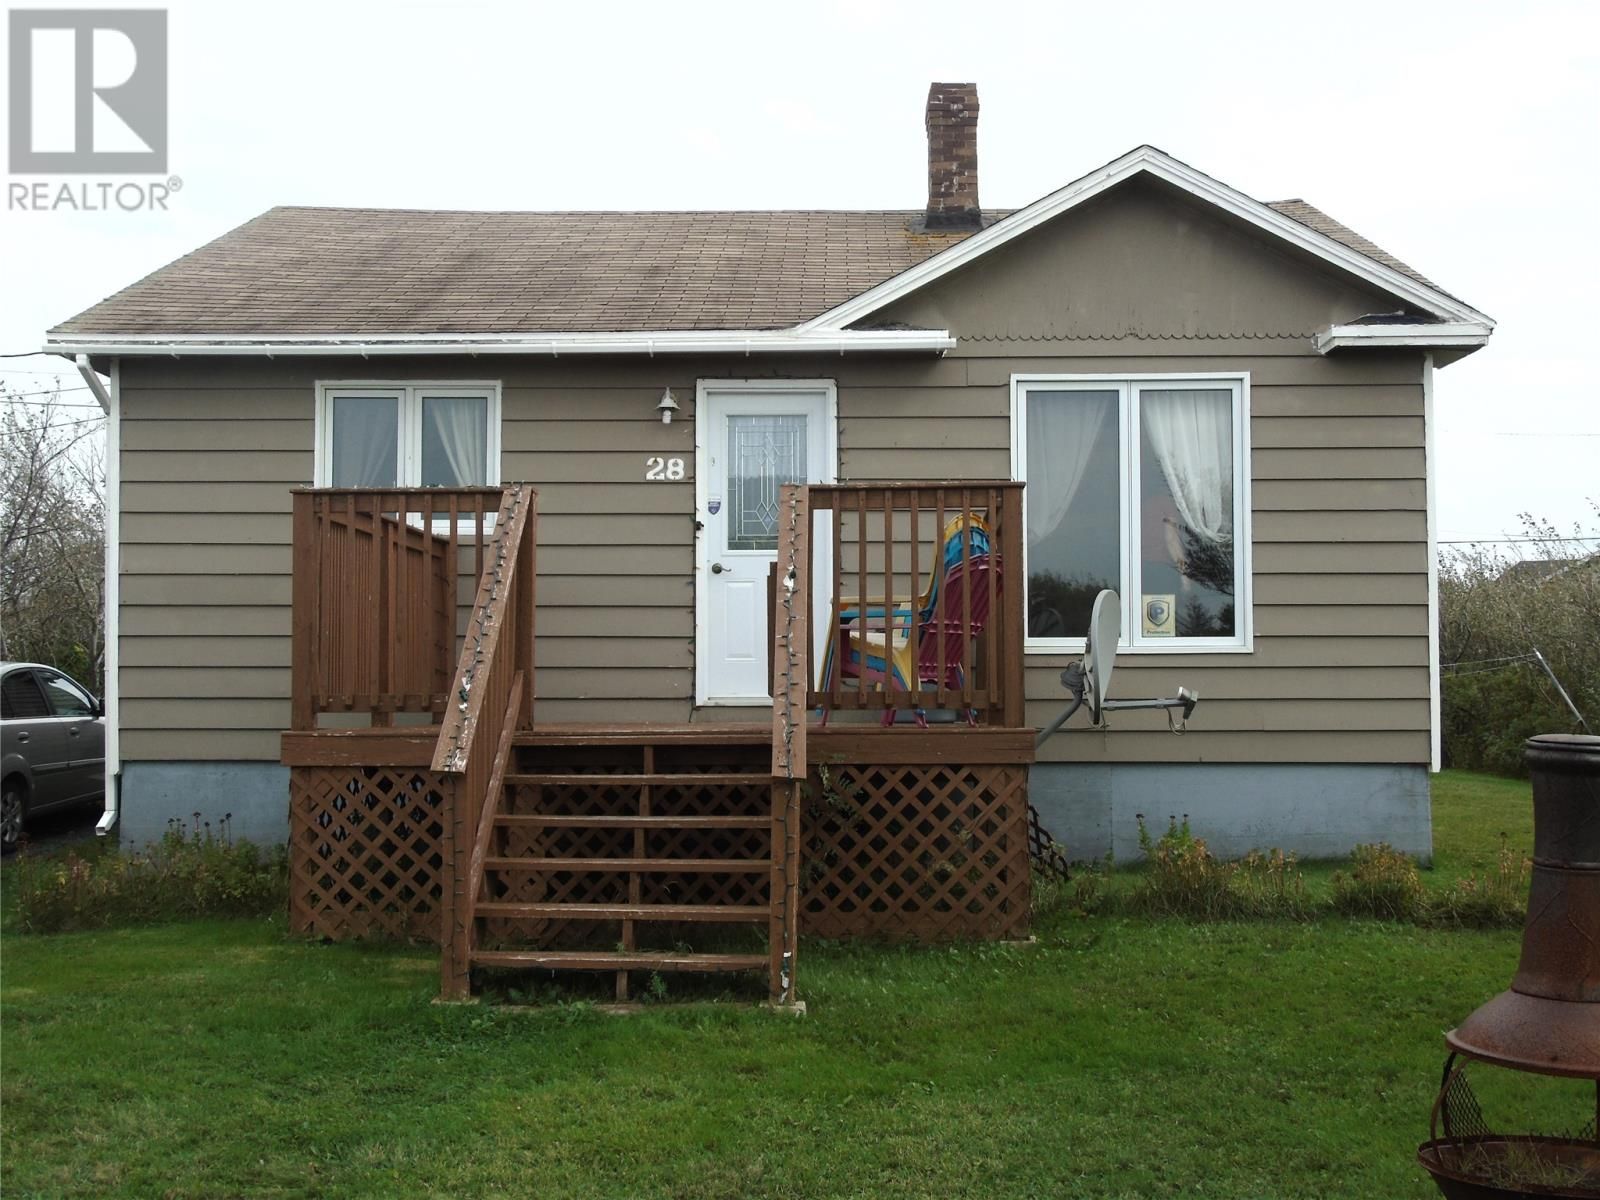 Main Photo: 28 Gull Island Road in Bell Island: House for sale : MLS®# 1258121